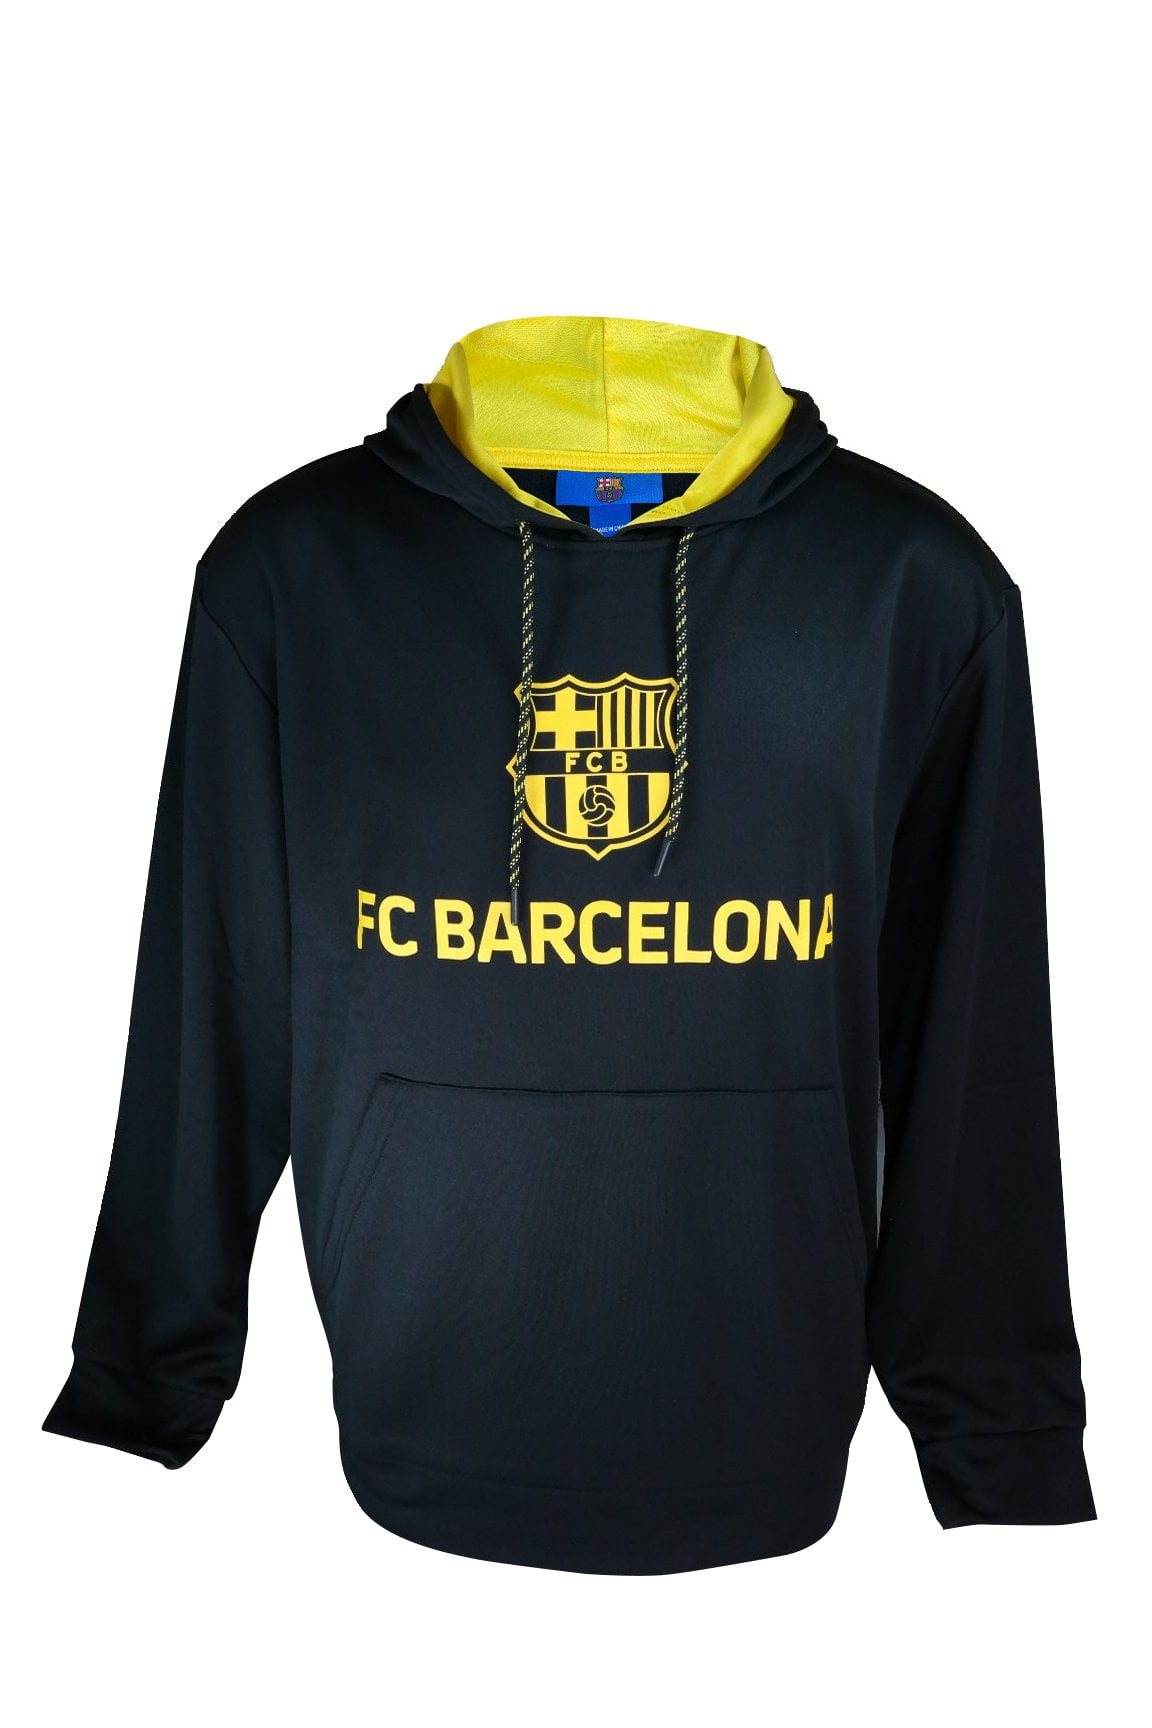 Icon Sports Group FC Barcelona Pullover Official Soccer Hoodie Sweater 